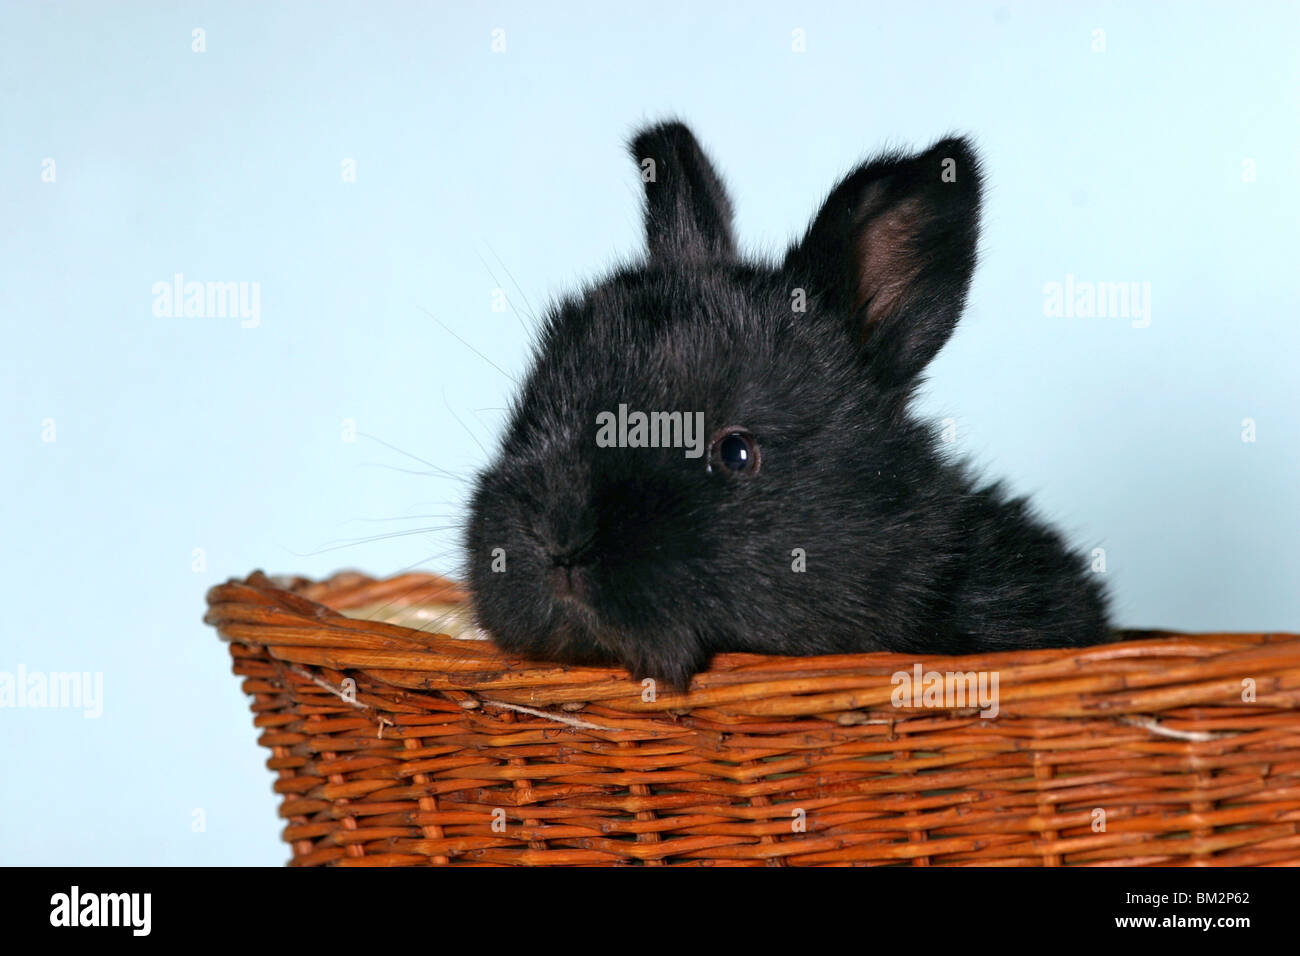 Kaninchenjunges im Körbchen / young bunny in the basket Stock Photo